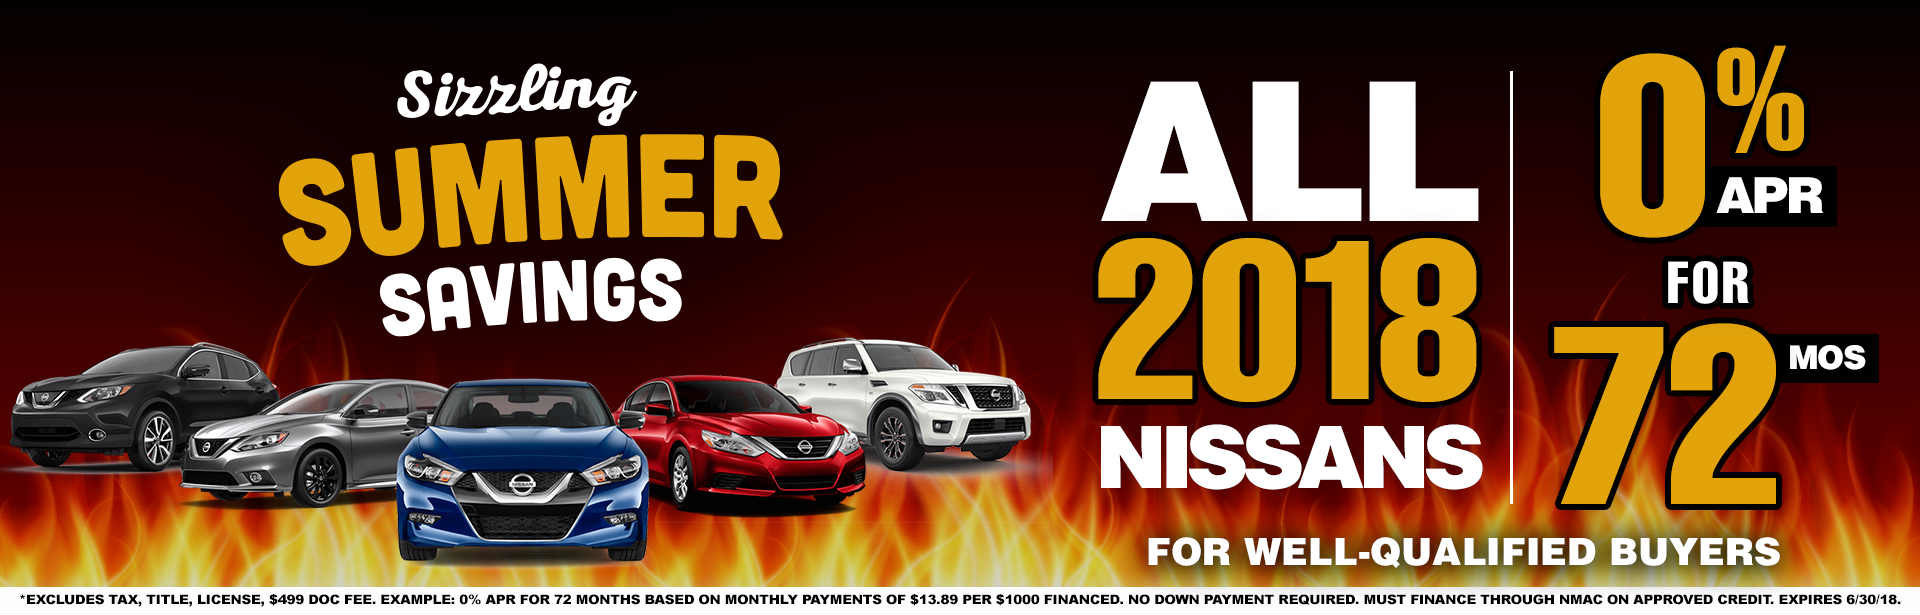 Las Vegas shoppers may be able to enjoy great summer savings at Planet Nissan until the end of June 2018. One offer is 0 percent APR financing for up to 72 months for qualified buyers.